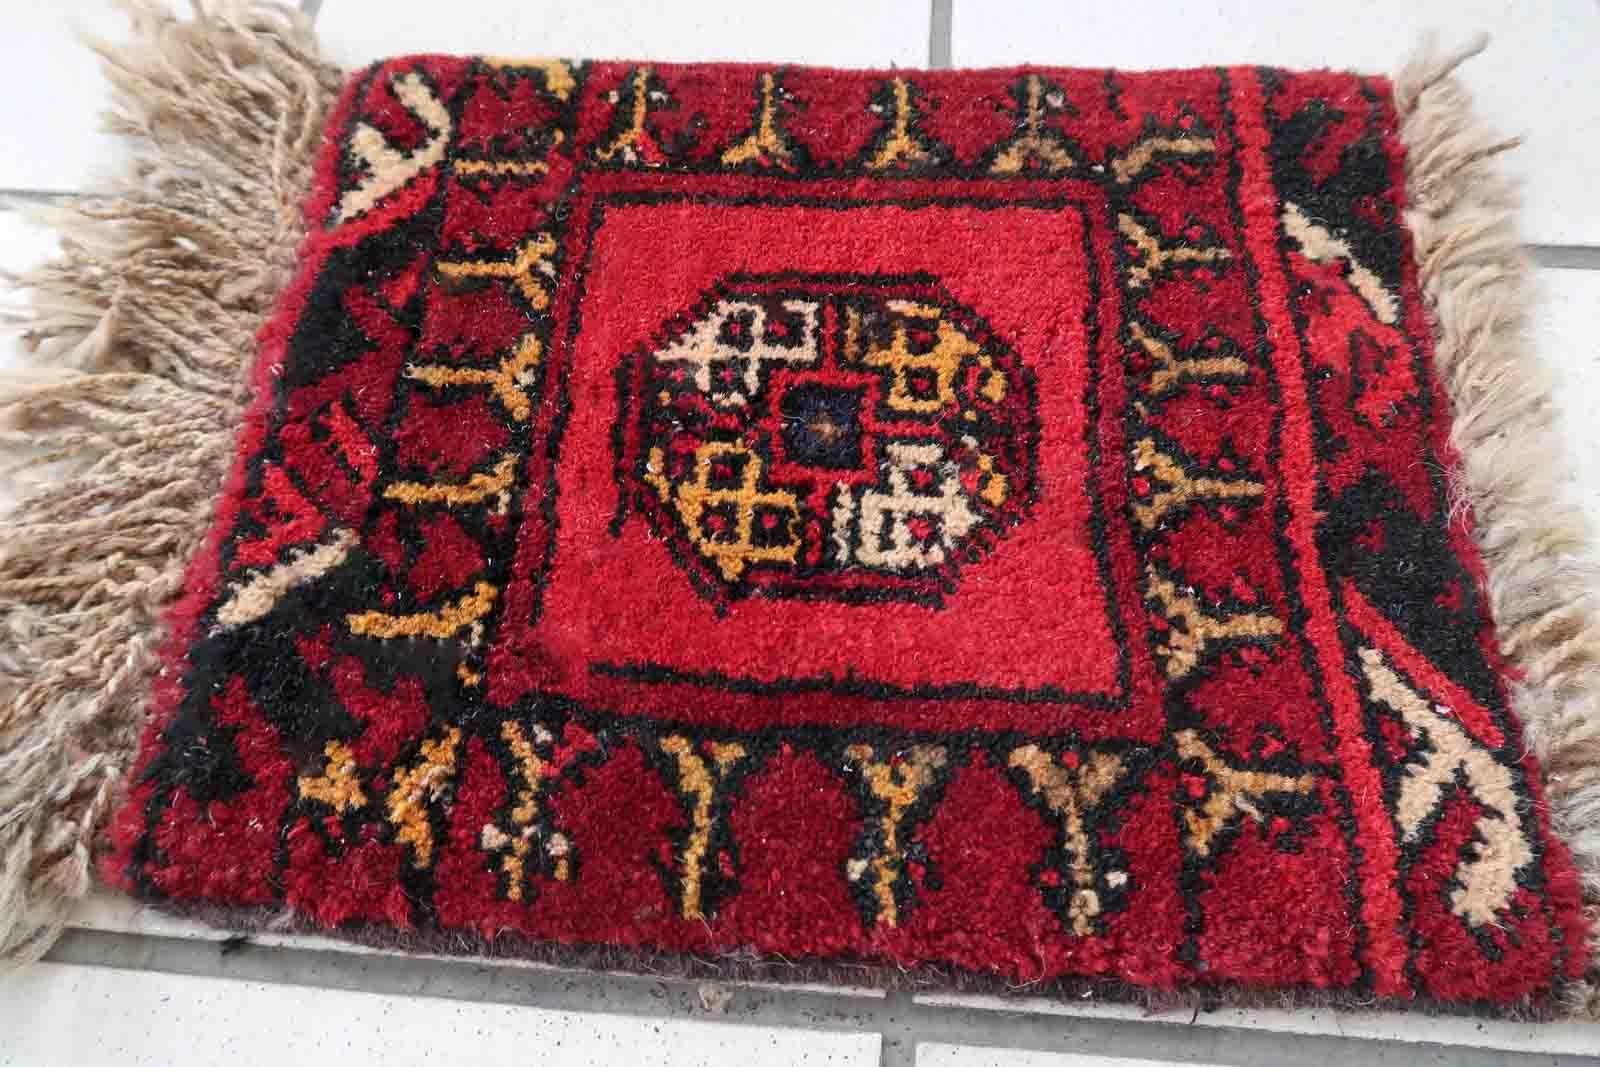 Handmade vintage Afghan Ersari mat in bright red shade. The rug is from the end of 20th century in original good condition. It can be used as a doll house rug.

-condition: original good,

-circa: 1970s,

-size: 0.8' x 1' (25cm x